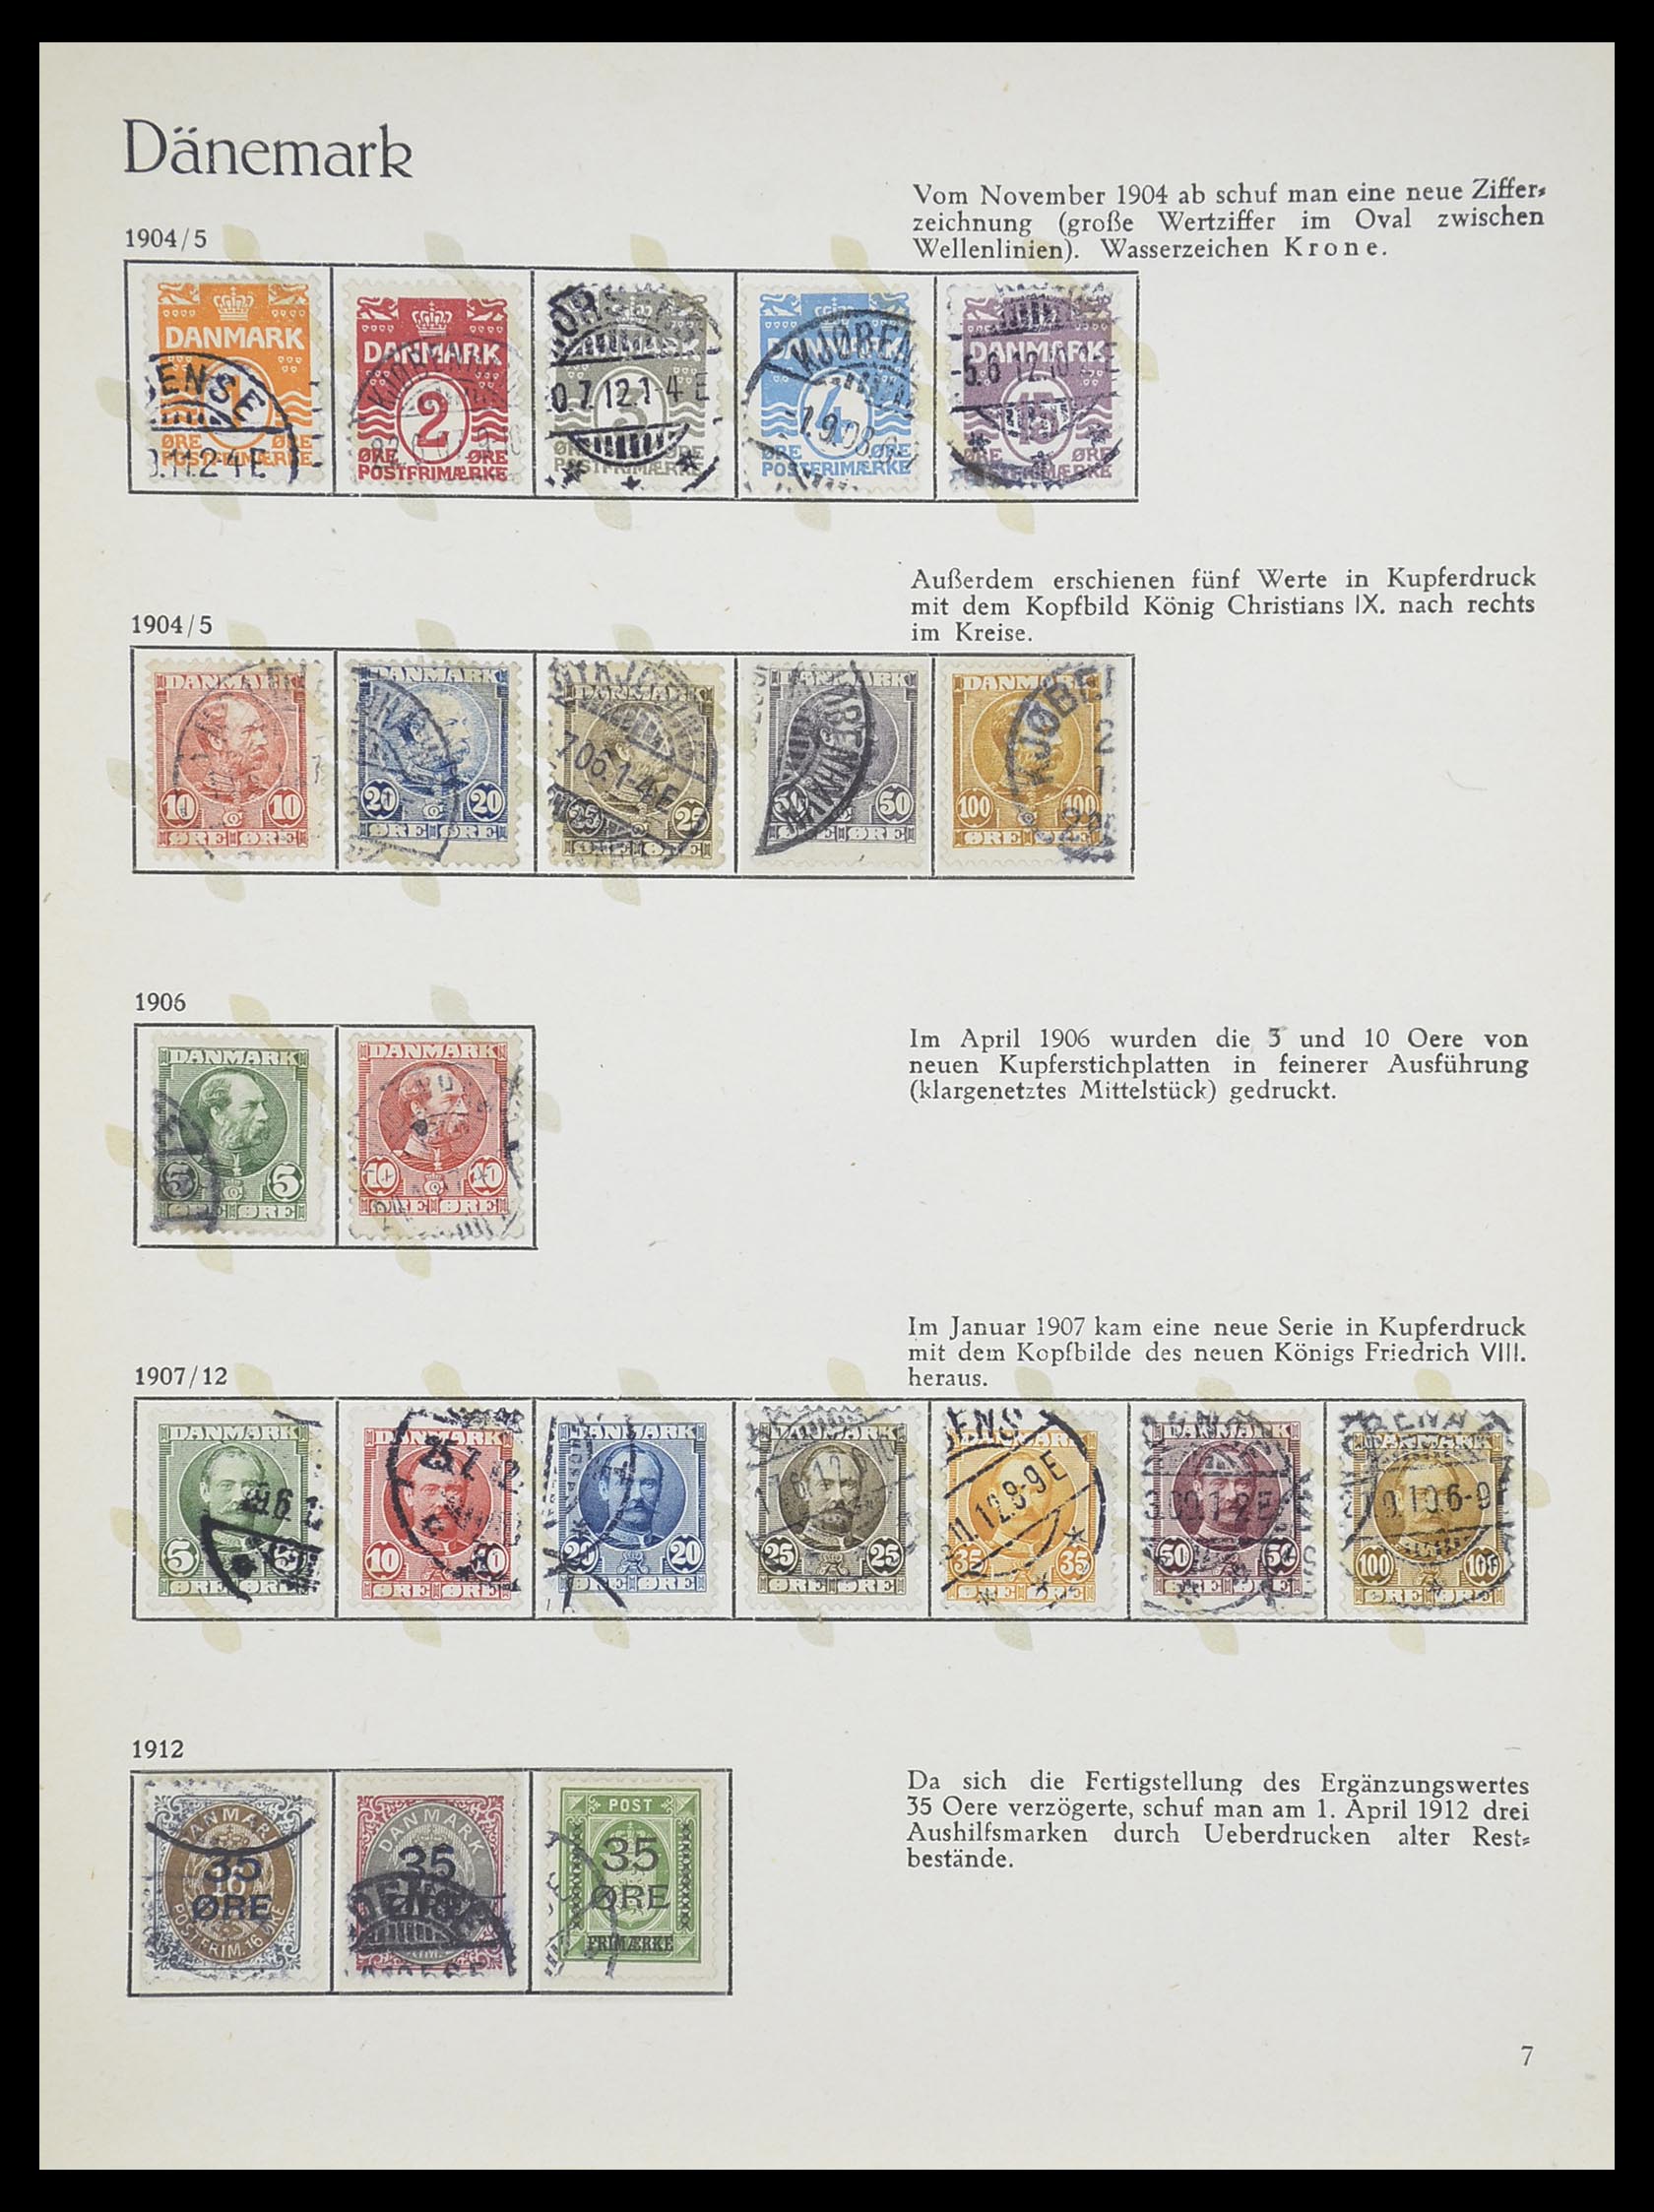 33708 003 - Stamp collection 33708 Denmark 1851-1970.